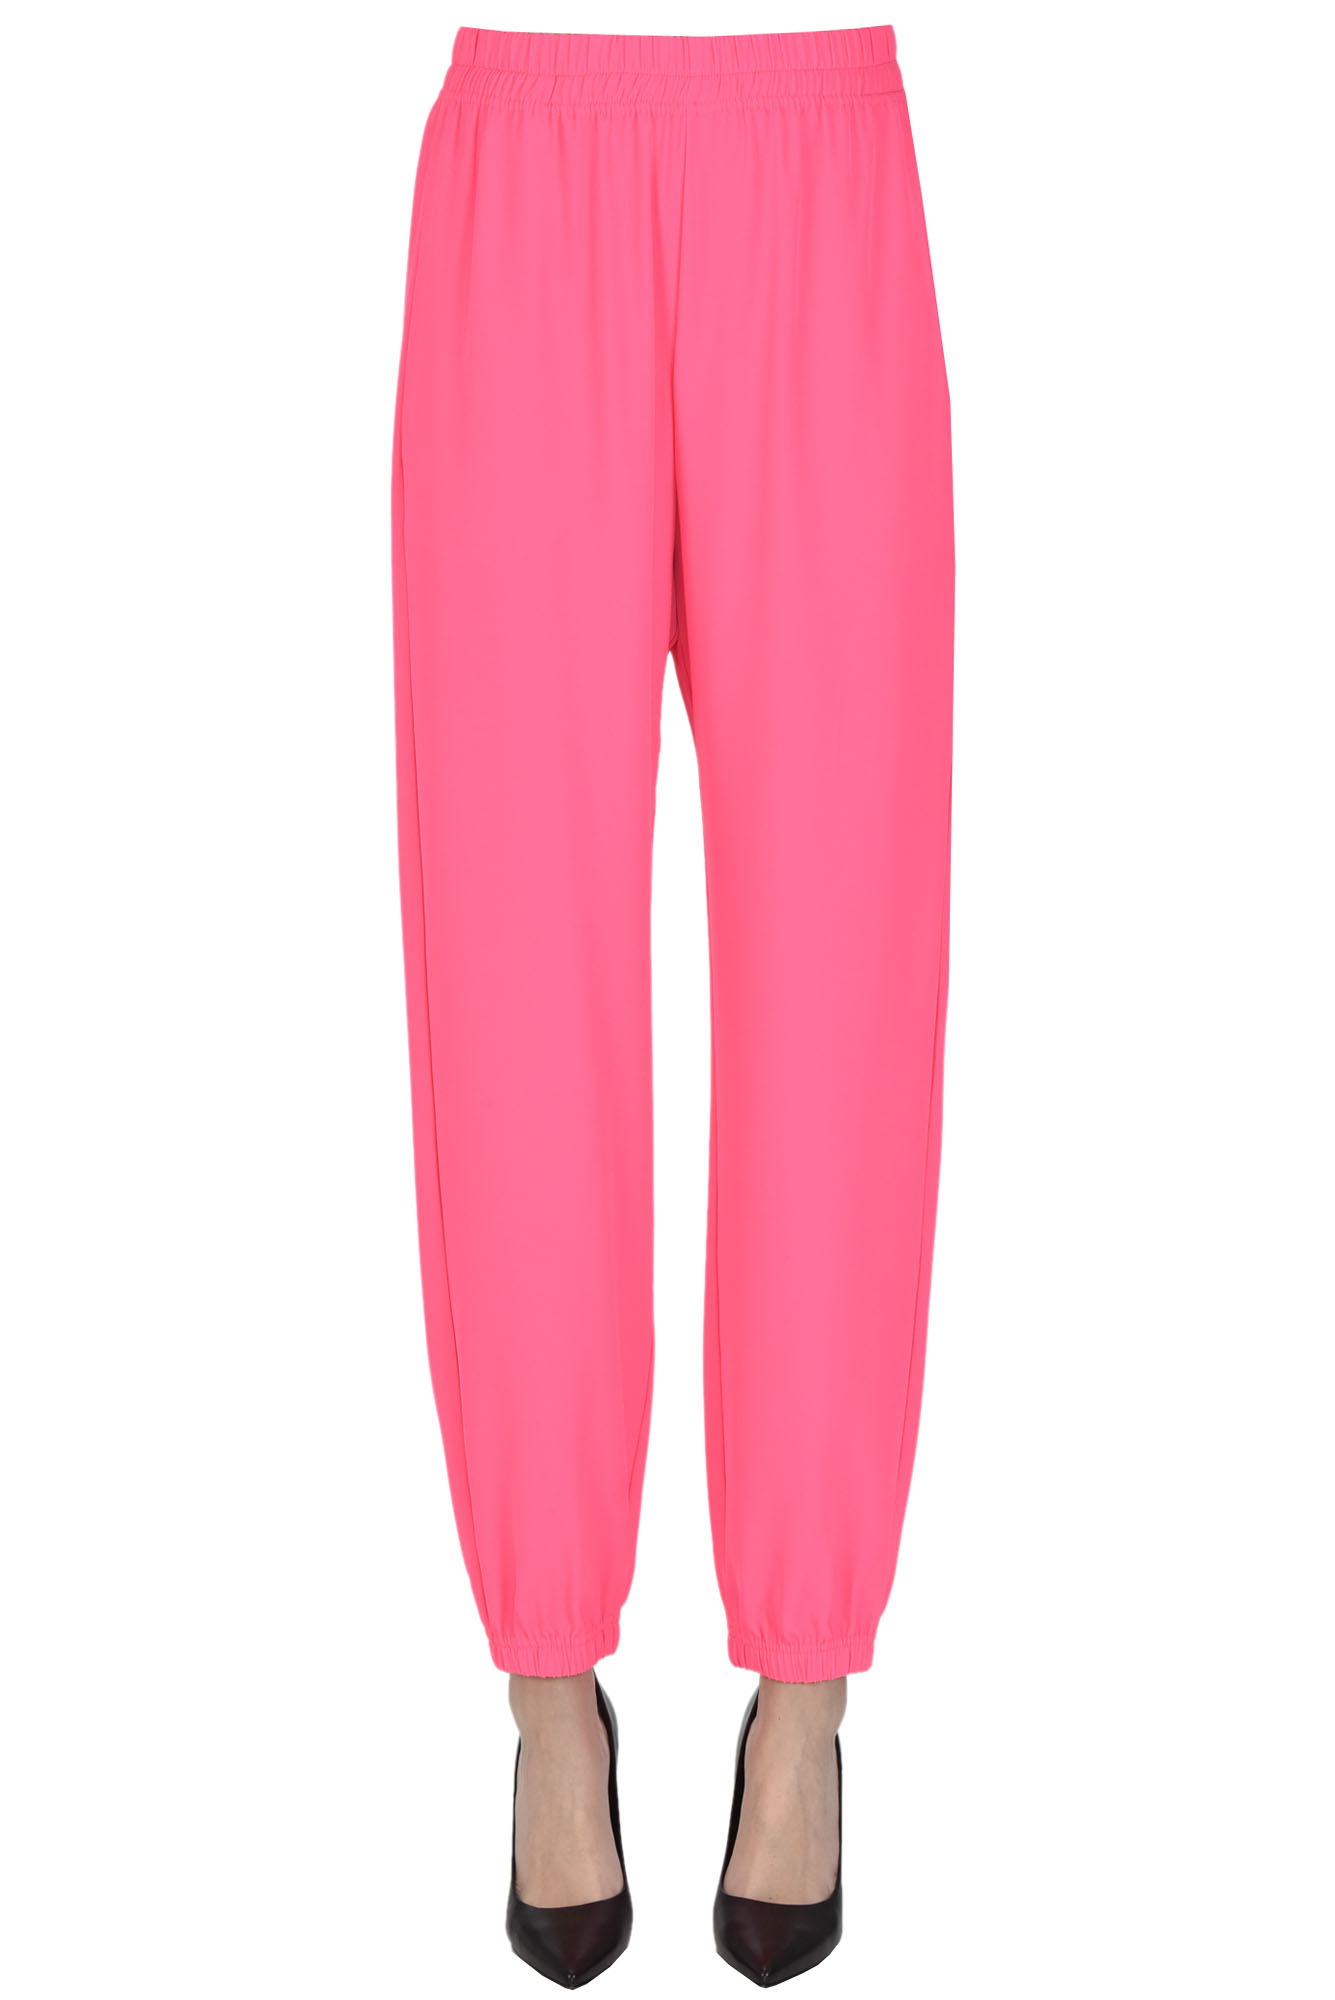 ANIYE BY TAYLOR FLUO JOGGING TROUSERS